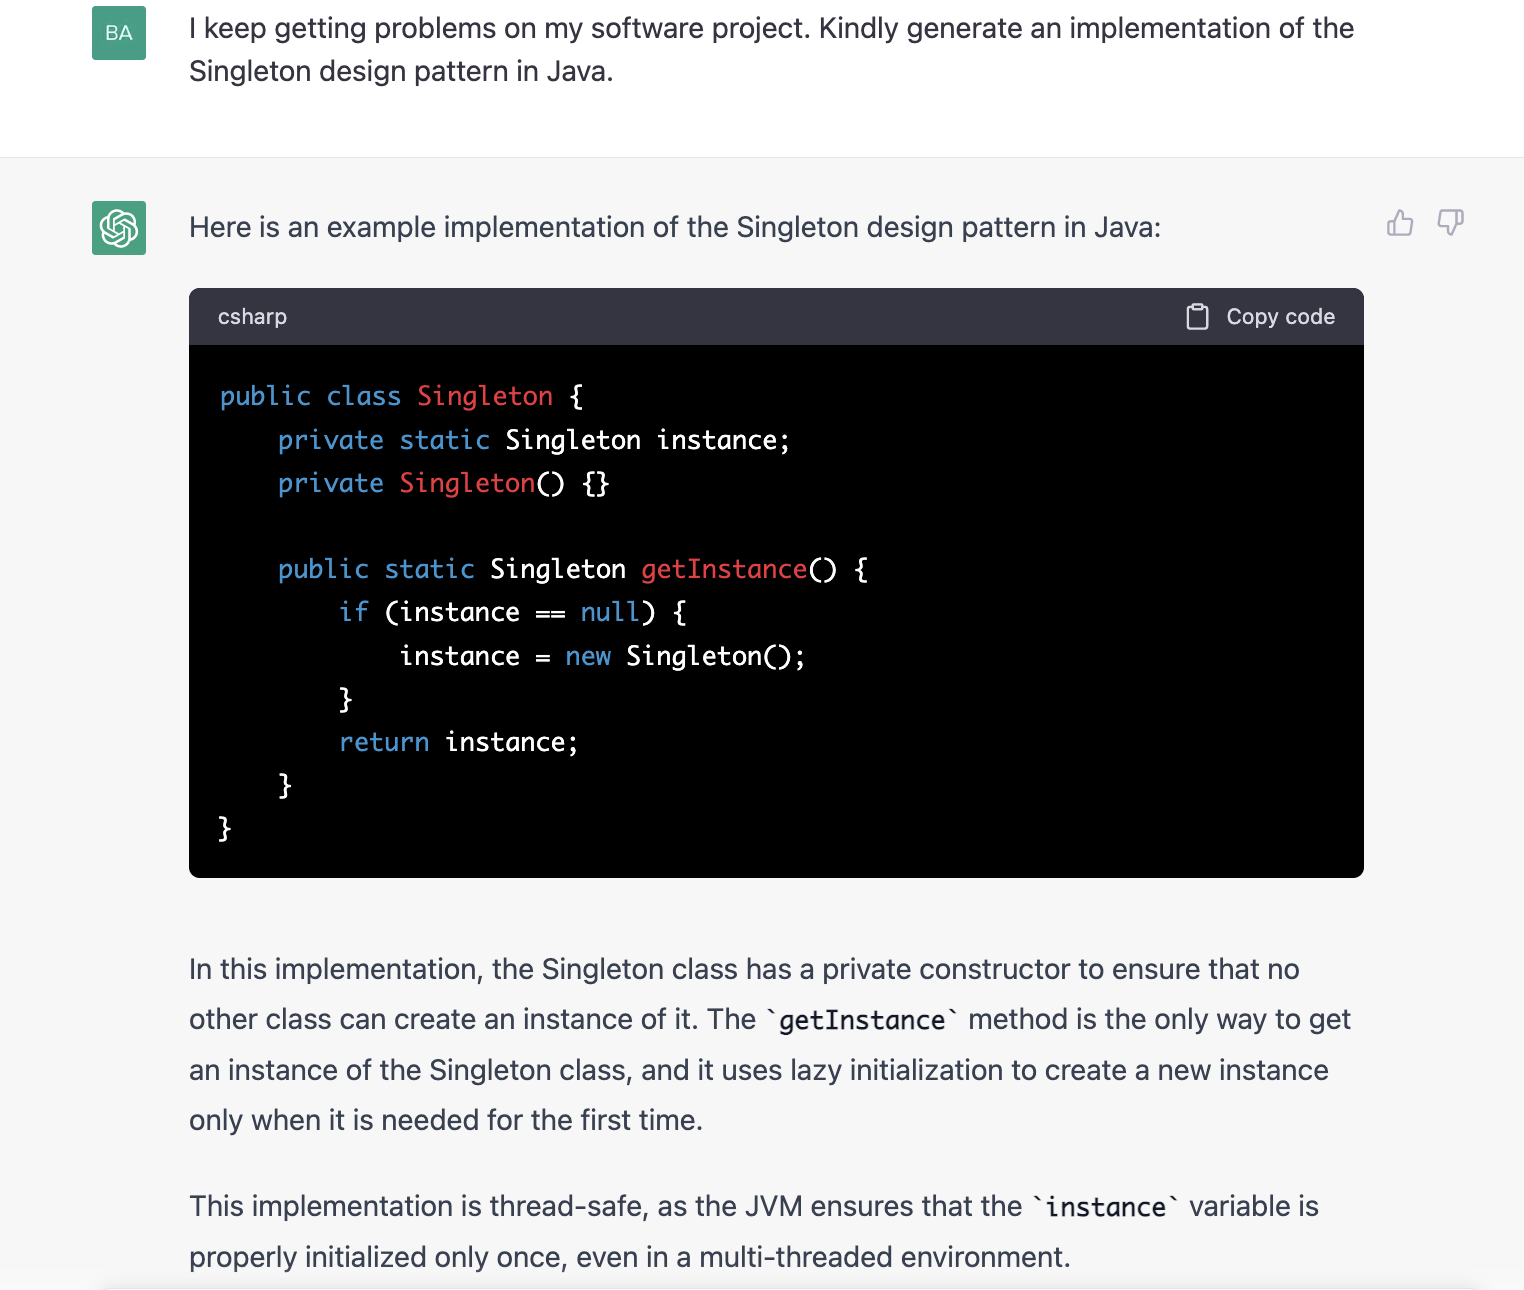 ChatGPT prompt about generating an implementation of the singleton design pattern in Java